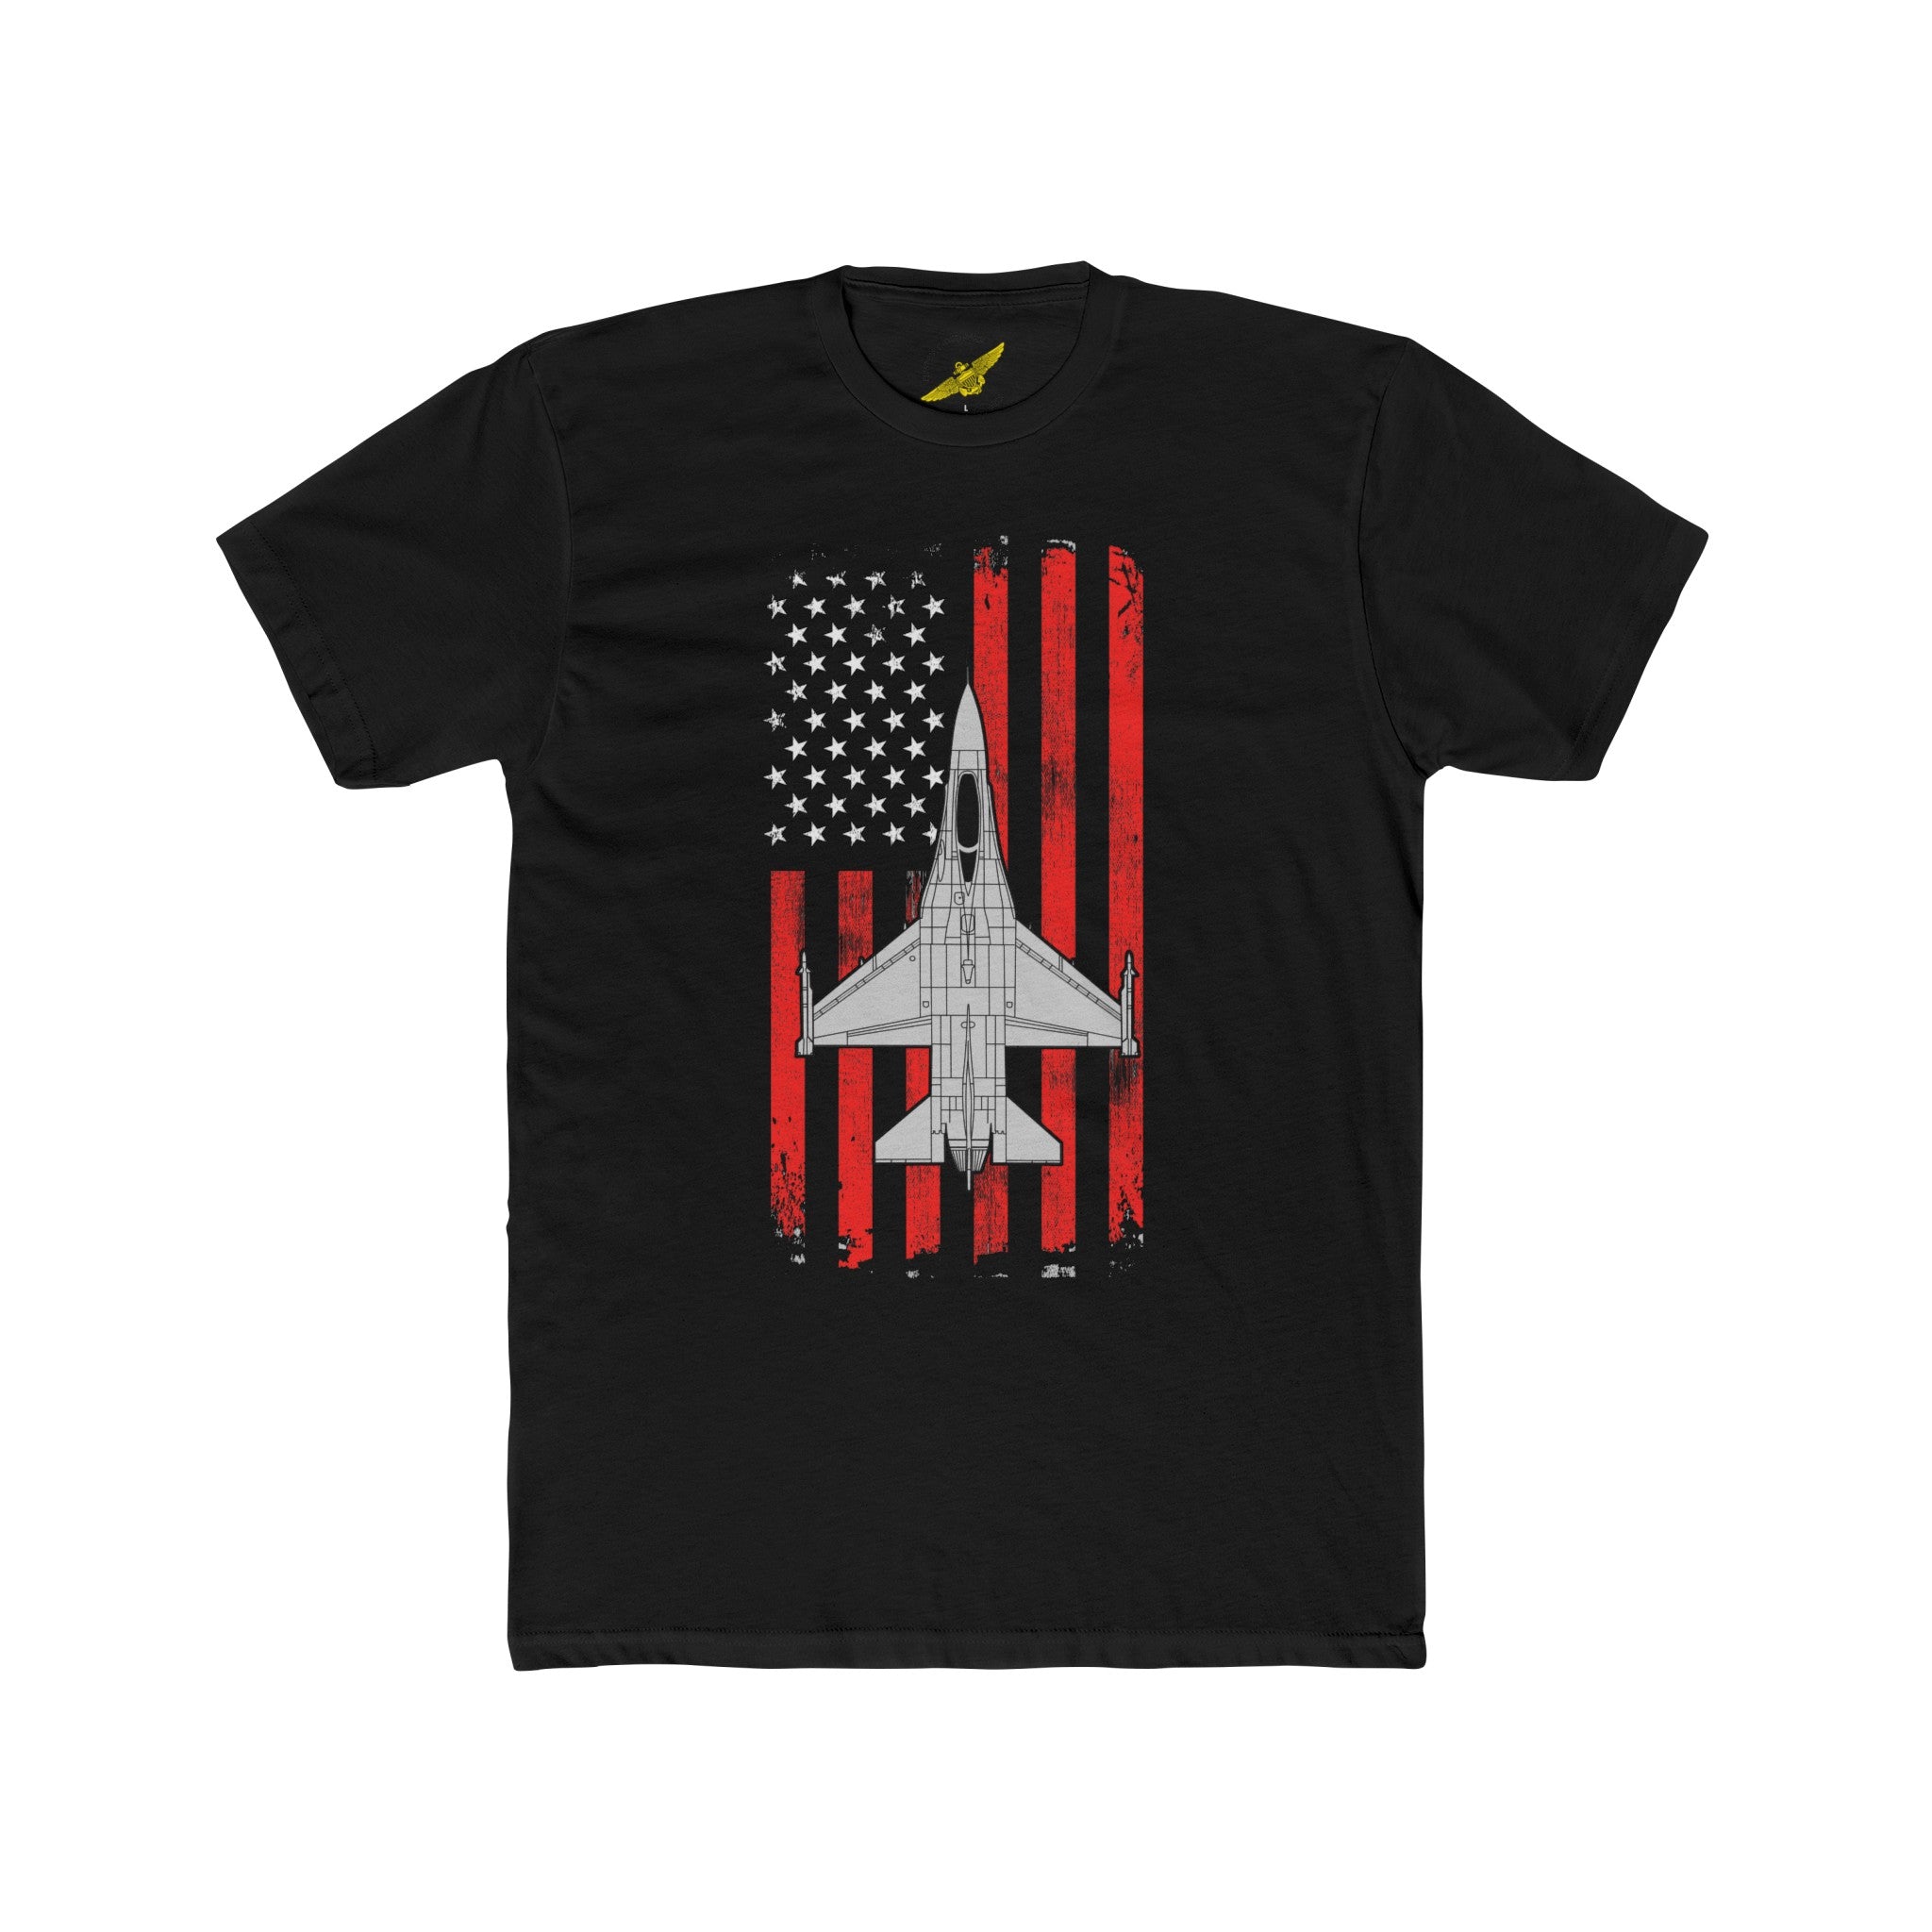 F-16 Fighting Falcon (Viper) Patriotic Flag Tee, US Air Force Fighter Aircraft